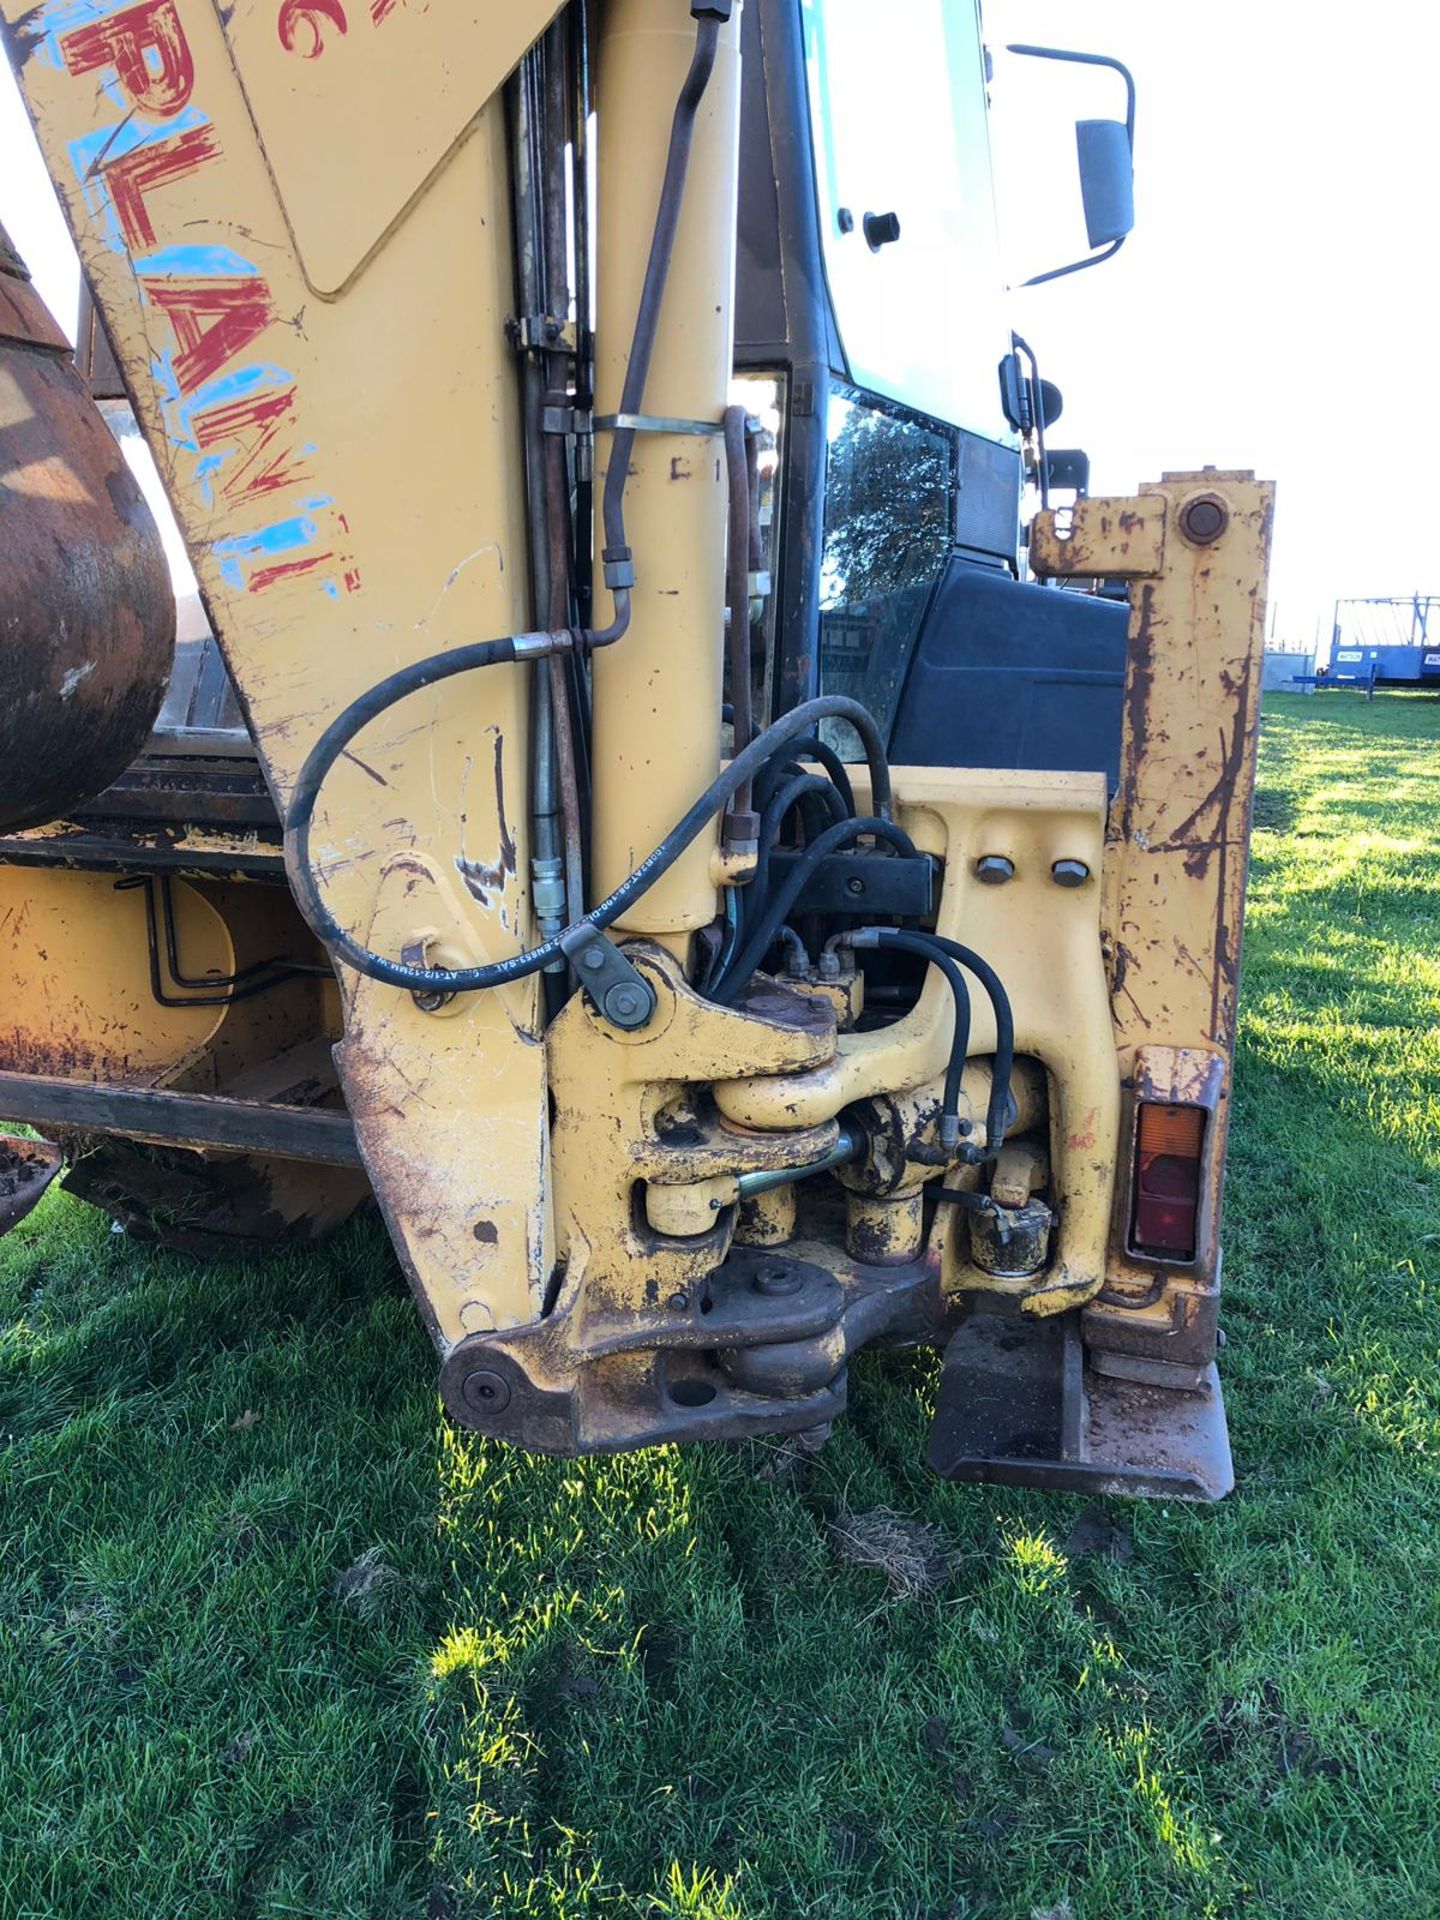 1989 FORD 655C YELLOW/BLACK BACKHOE LOADER TRACTOR, STARTS, RUNS, LIFTS & DIGS *PLUS VAT* - Image 11 of 19